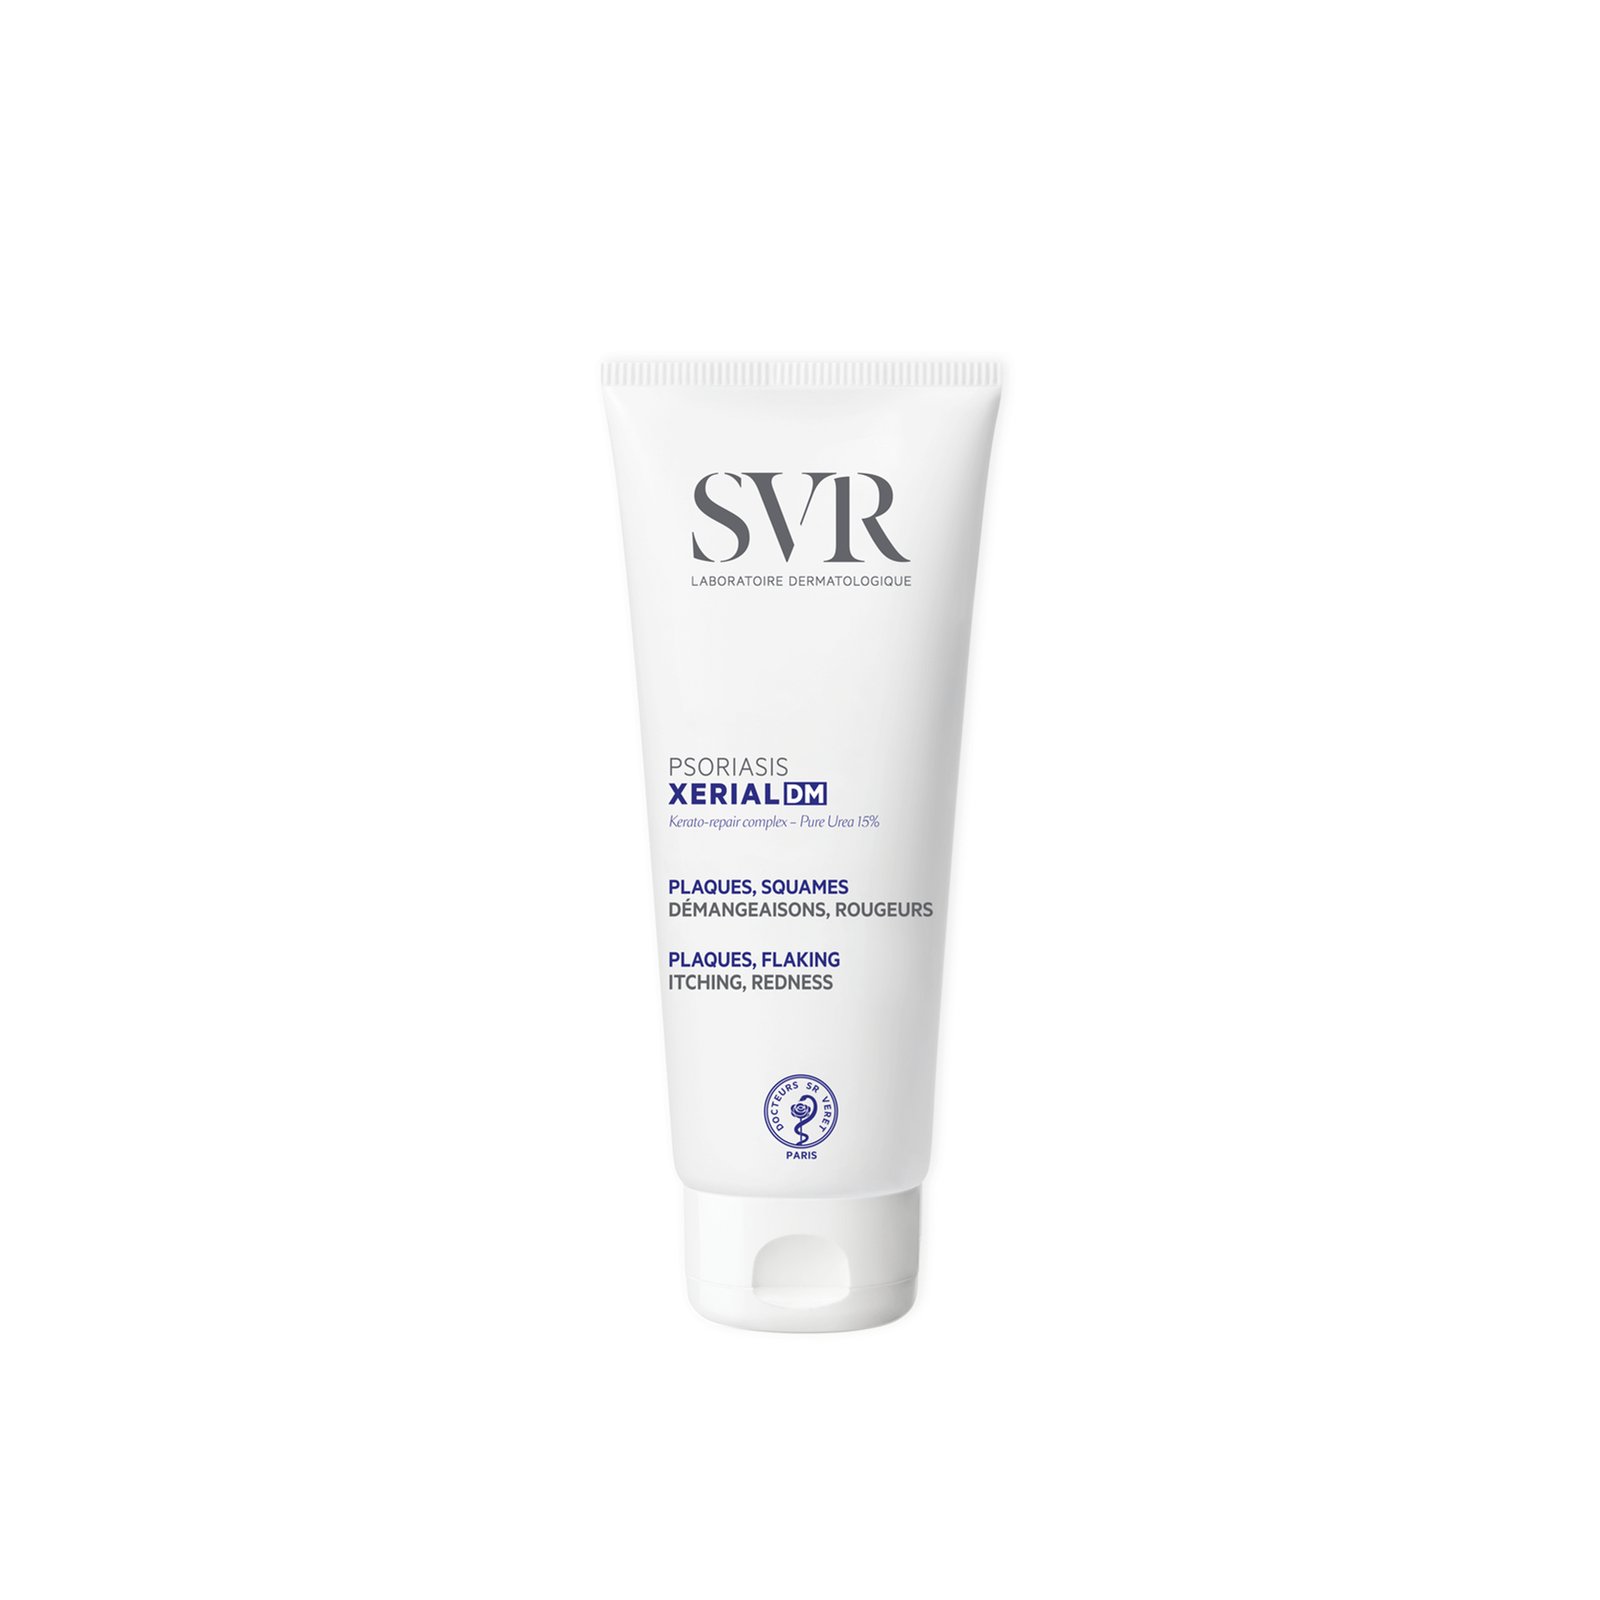 SVR Xerial DM Psoriasis Treatment Face And Body Cream 200ml